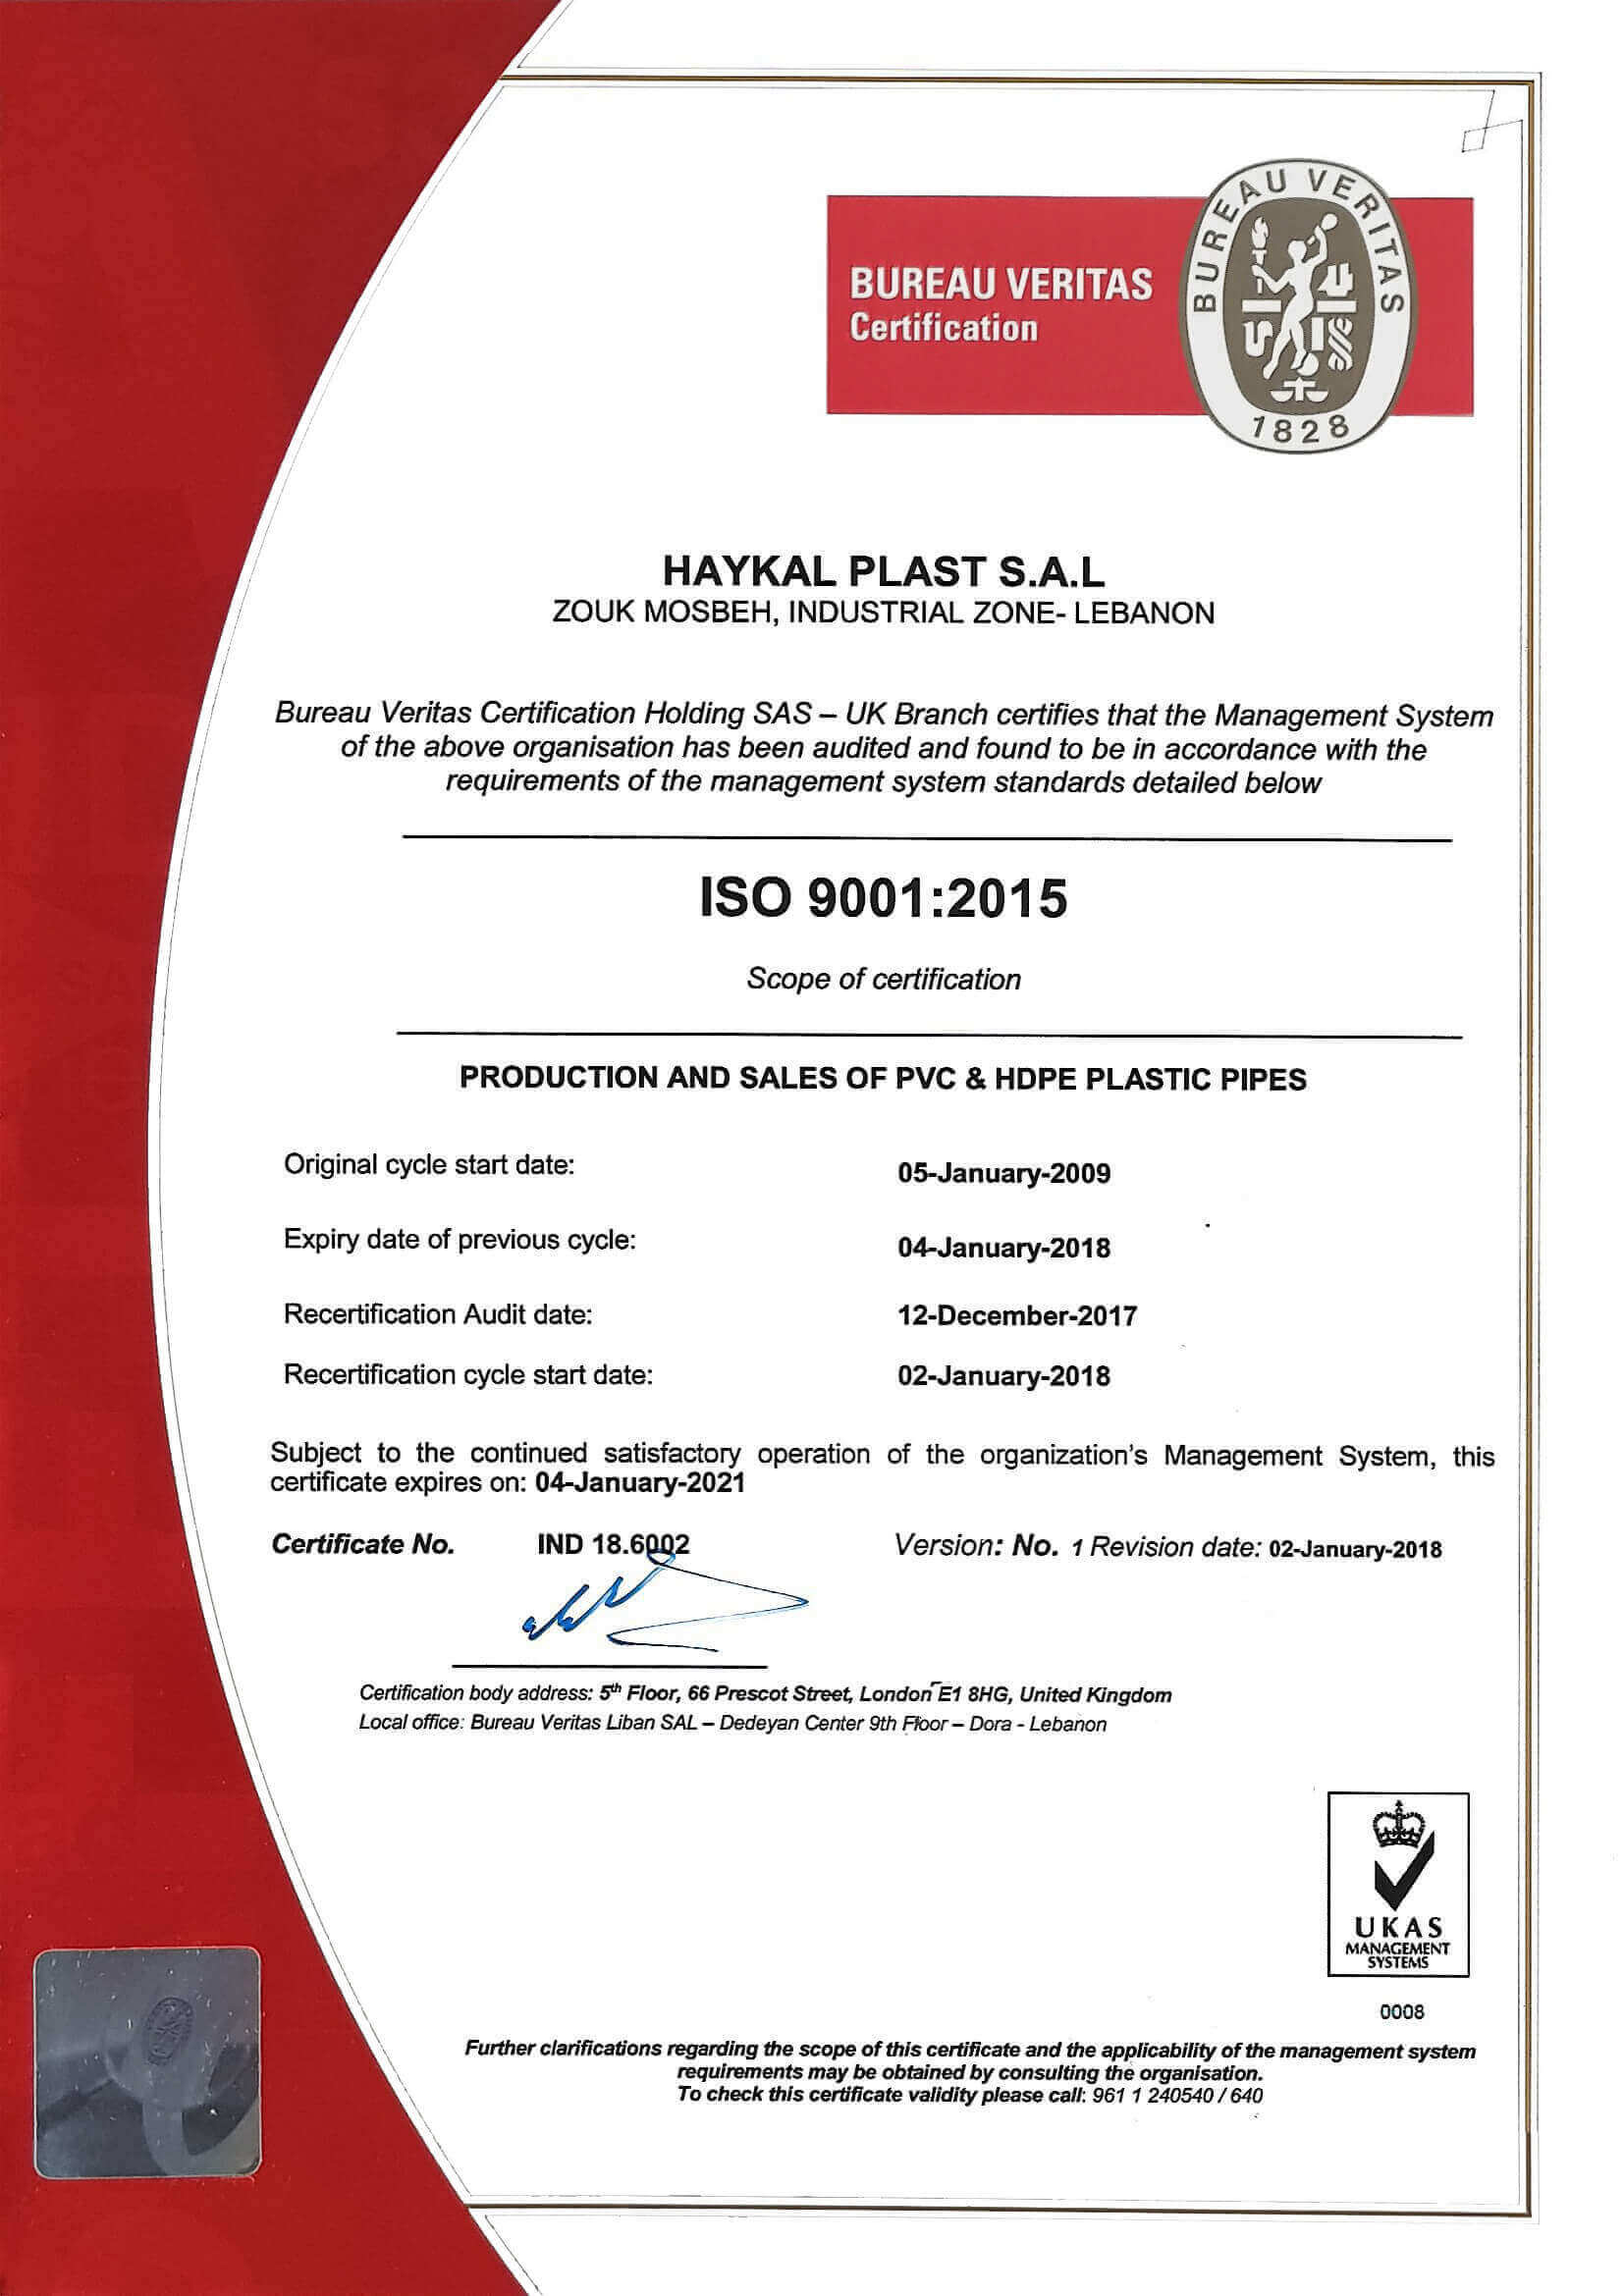 Haykal Plast ISO 9001:2015 Certificate - Production and Sales of PVC and HDPE Plastic Pipes